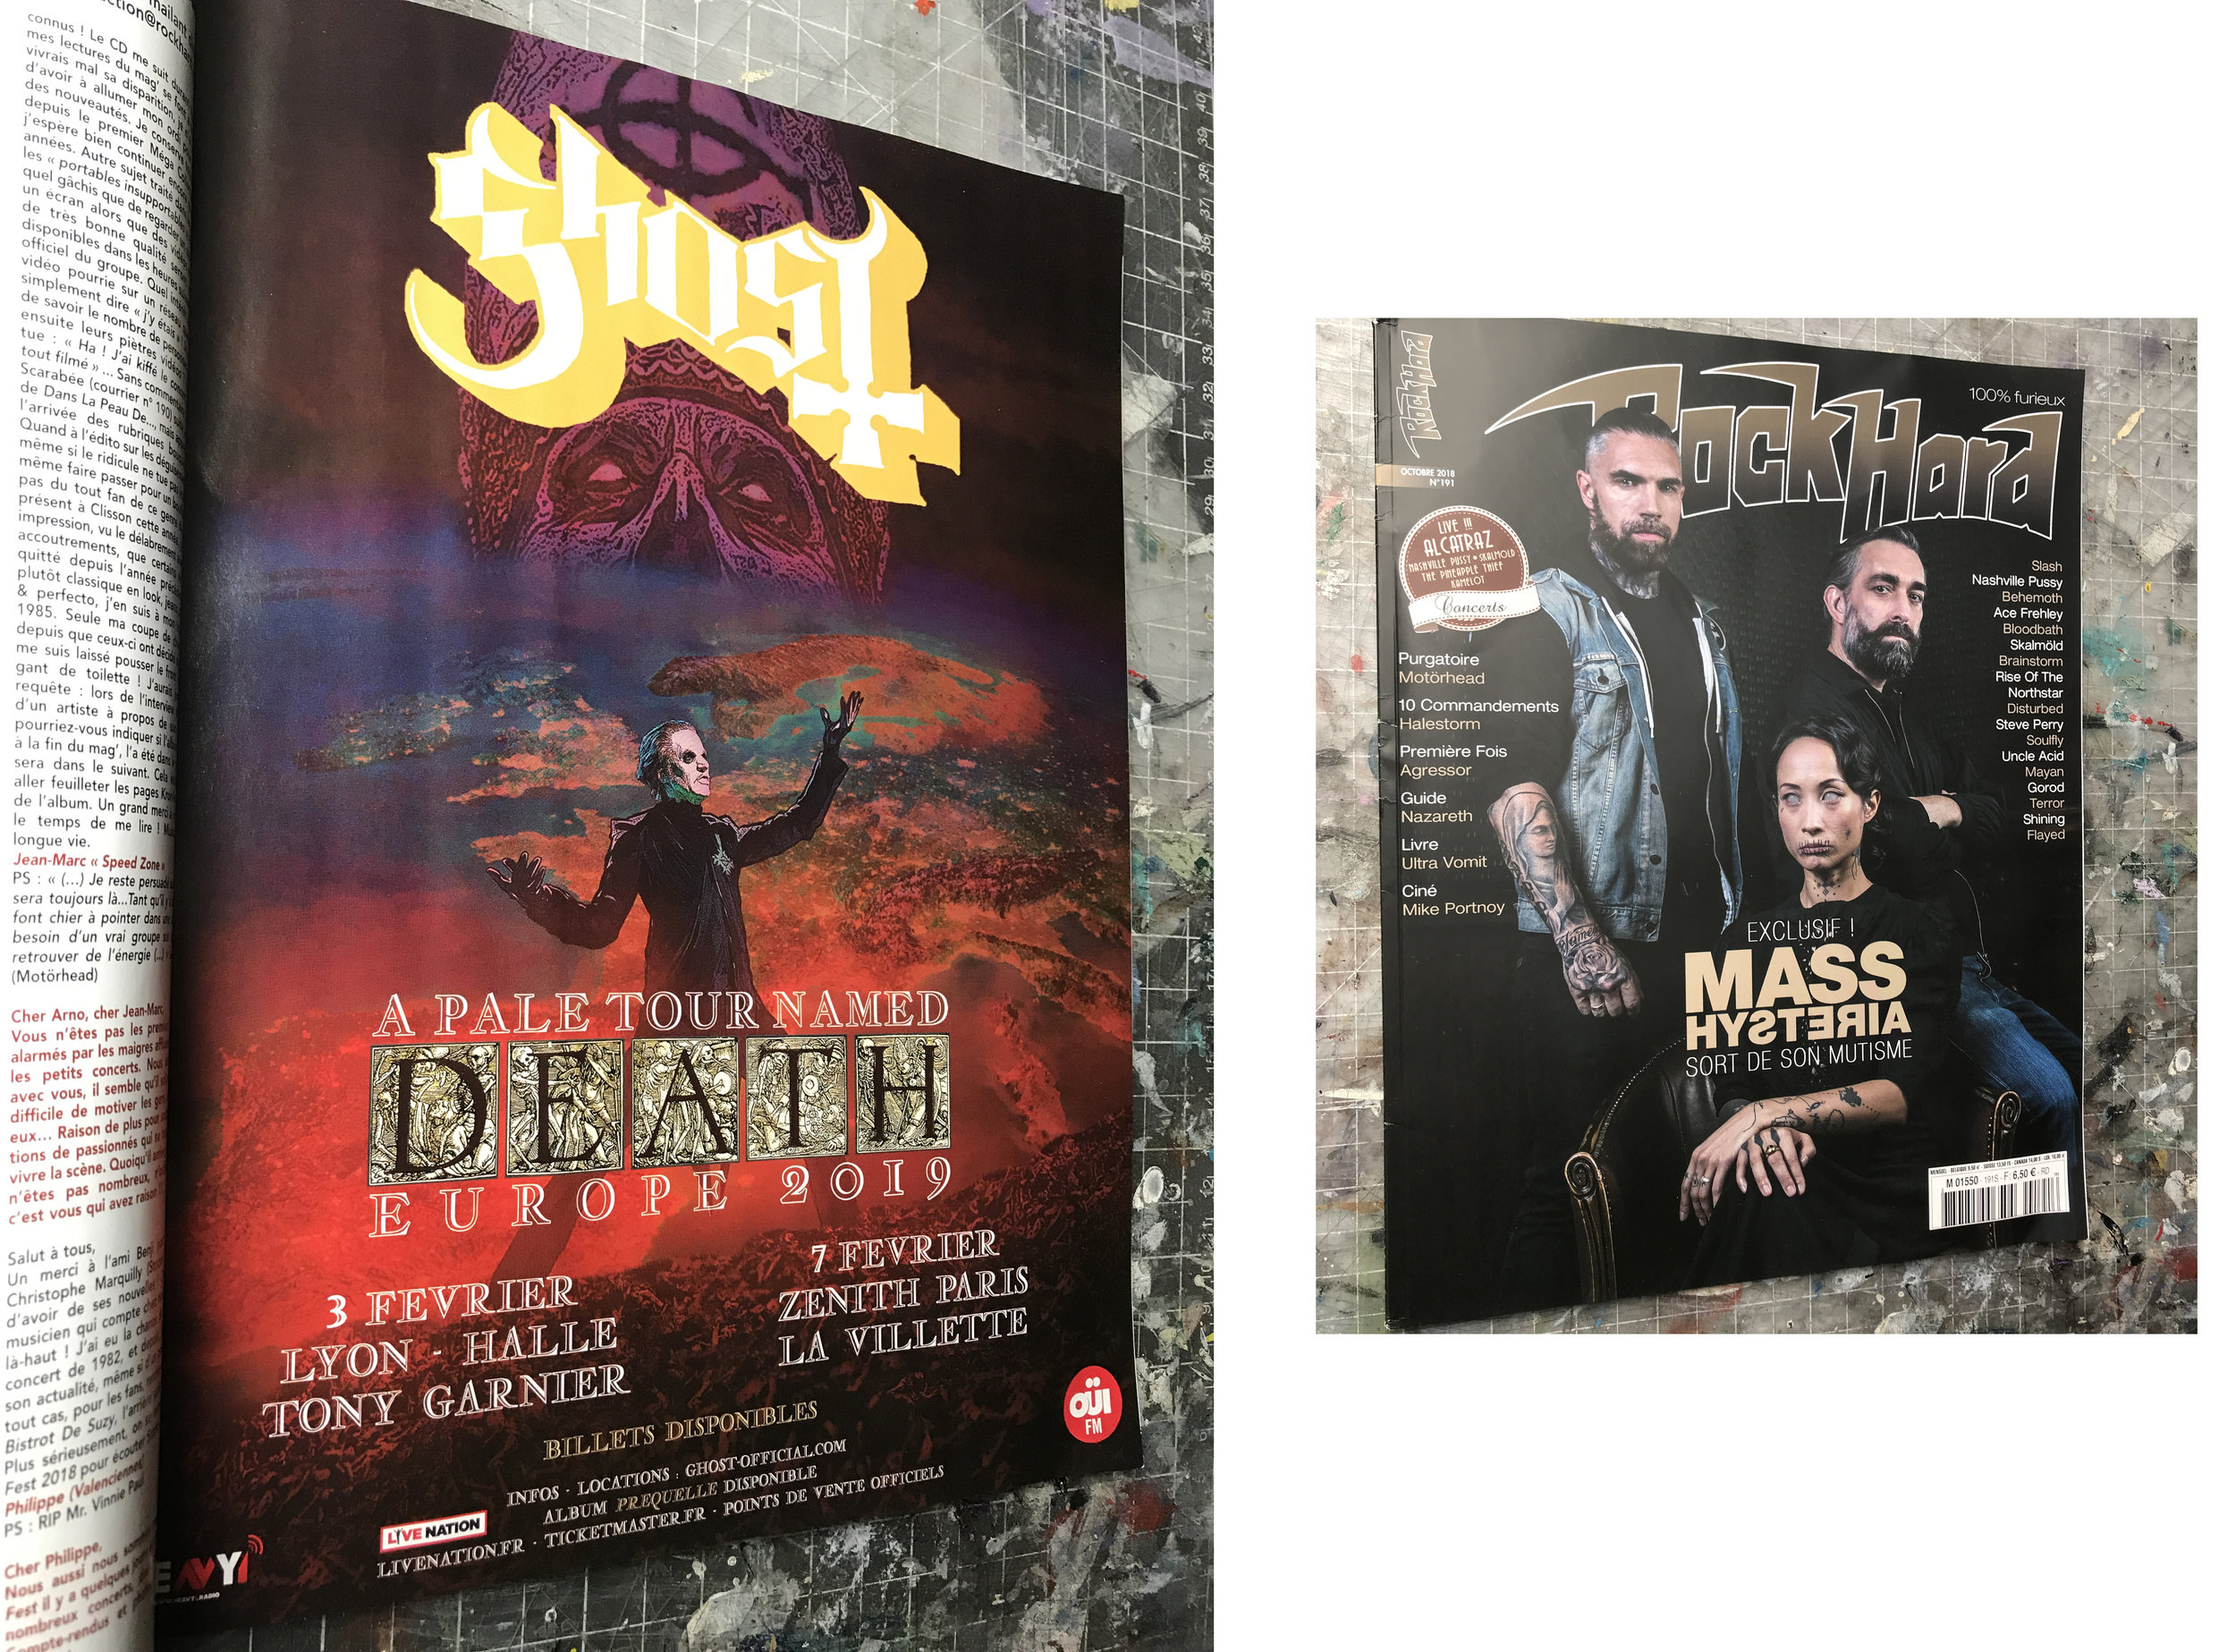   GHOST | A Pale Tour named Death 2019 France poster |    Rock Hard France magazine advert | October 2018 (issue #191)   Official concert promo 